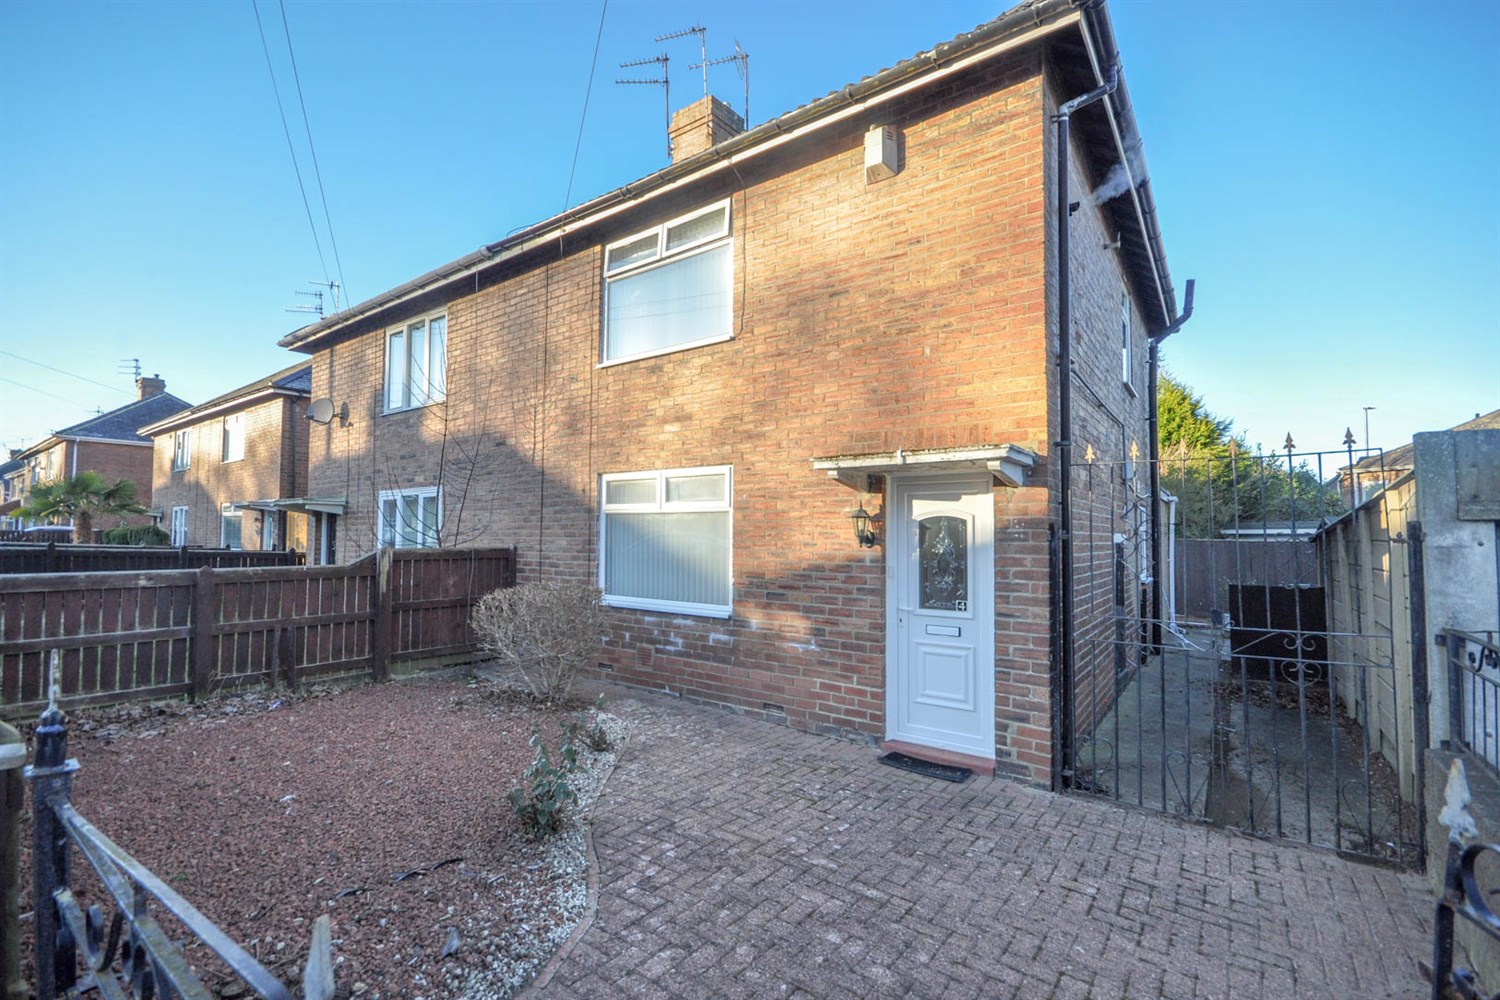 3 bed semi-detached house for sale in Farnon Road, Gosforth - Property Image 1